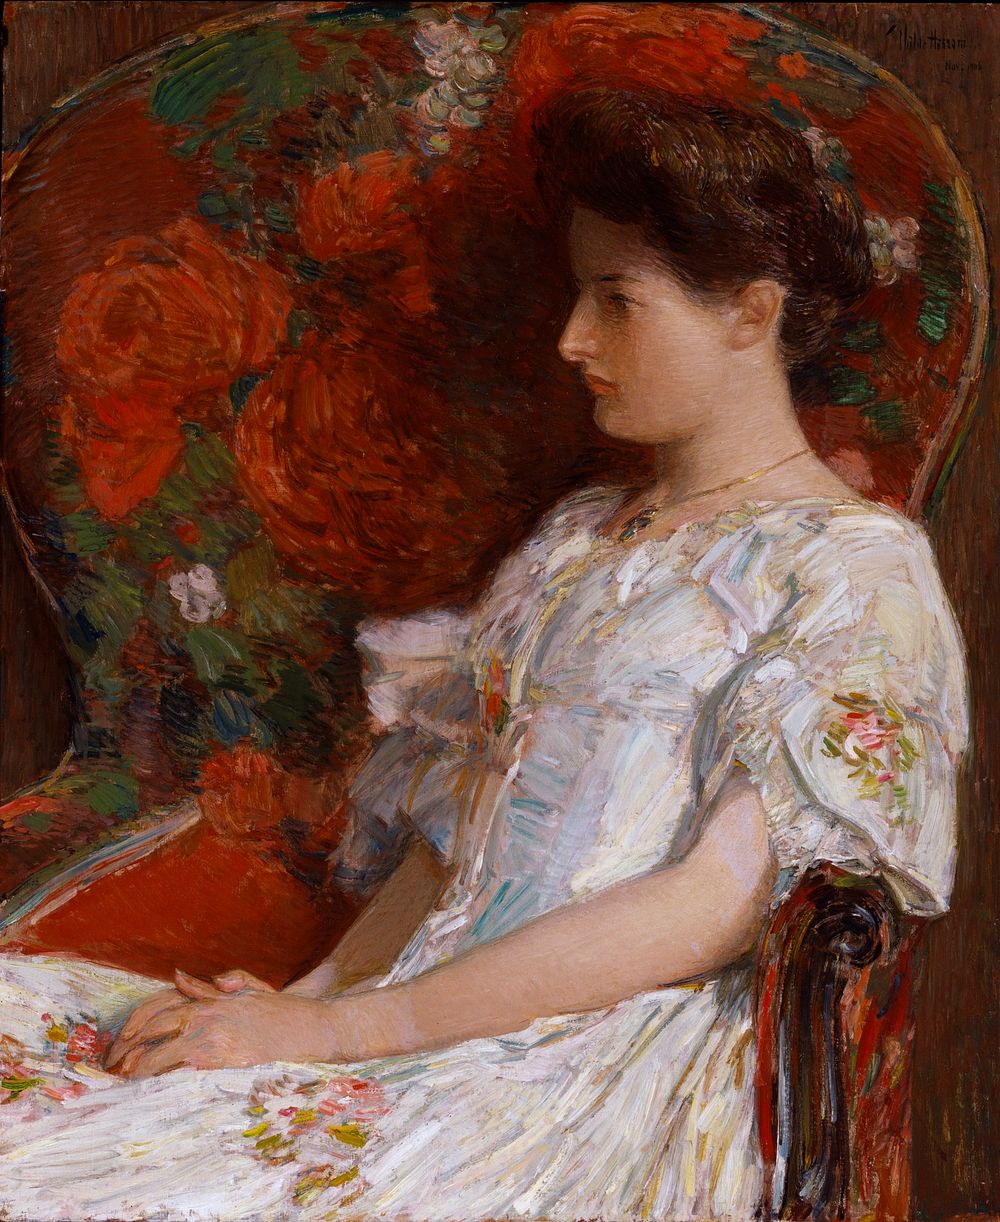 The Victorian Chair by Frederick Childe Hassam